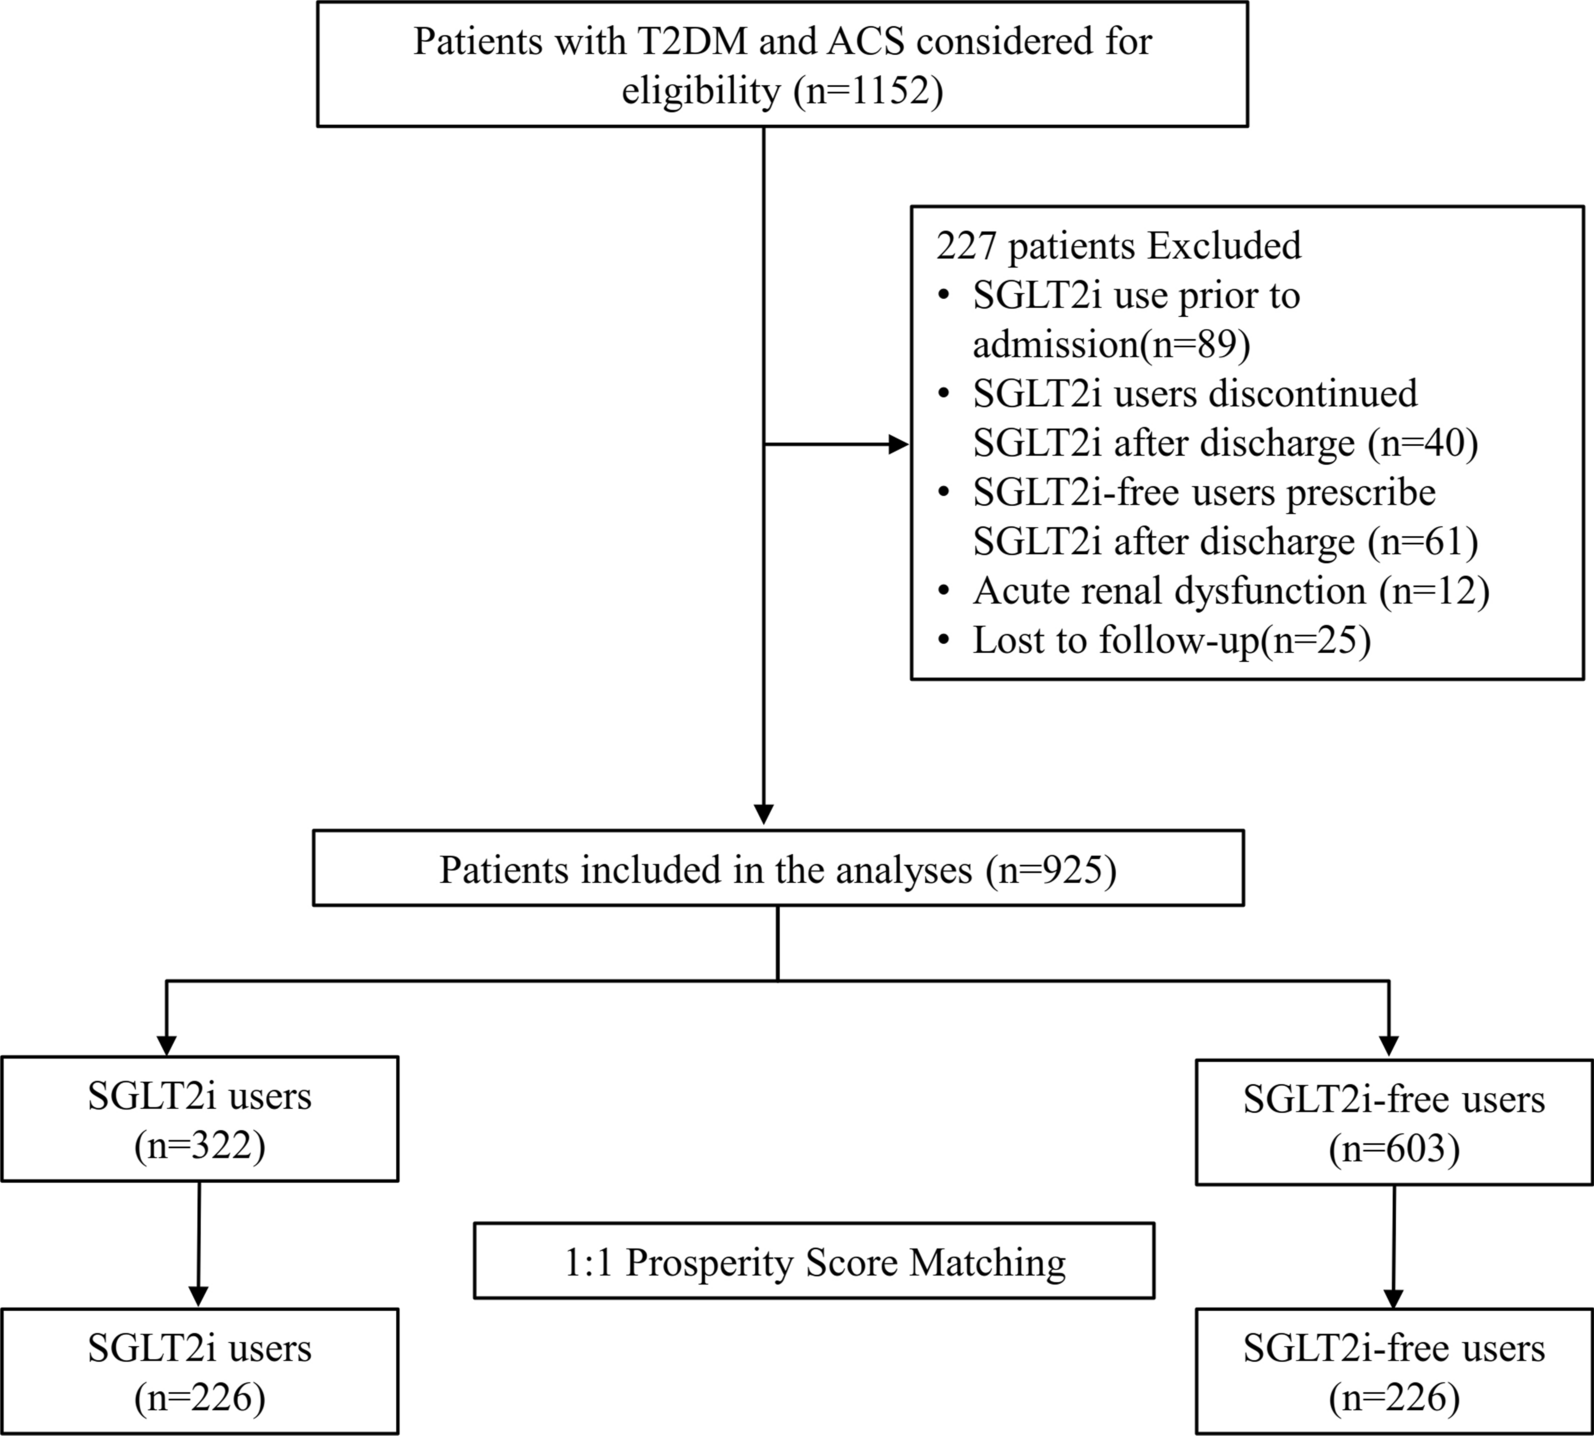 Association of sodium-glucose cotransporter 2 inhibitors with risk of major adverse cardiovascular events in type 2 diabetes patients with acute coronary syndrome: a propensity score‑matched analysis